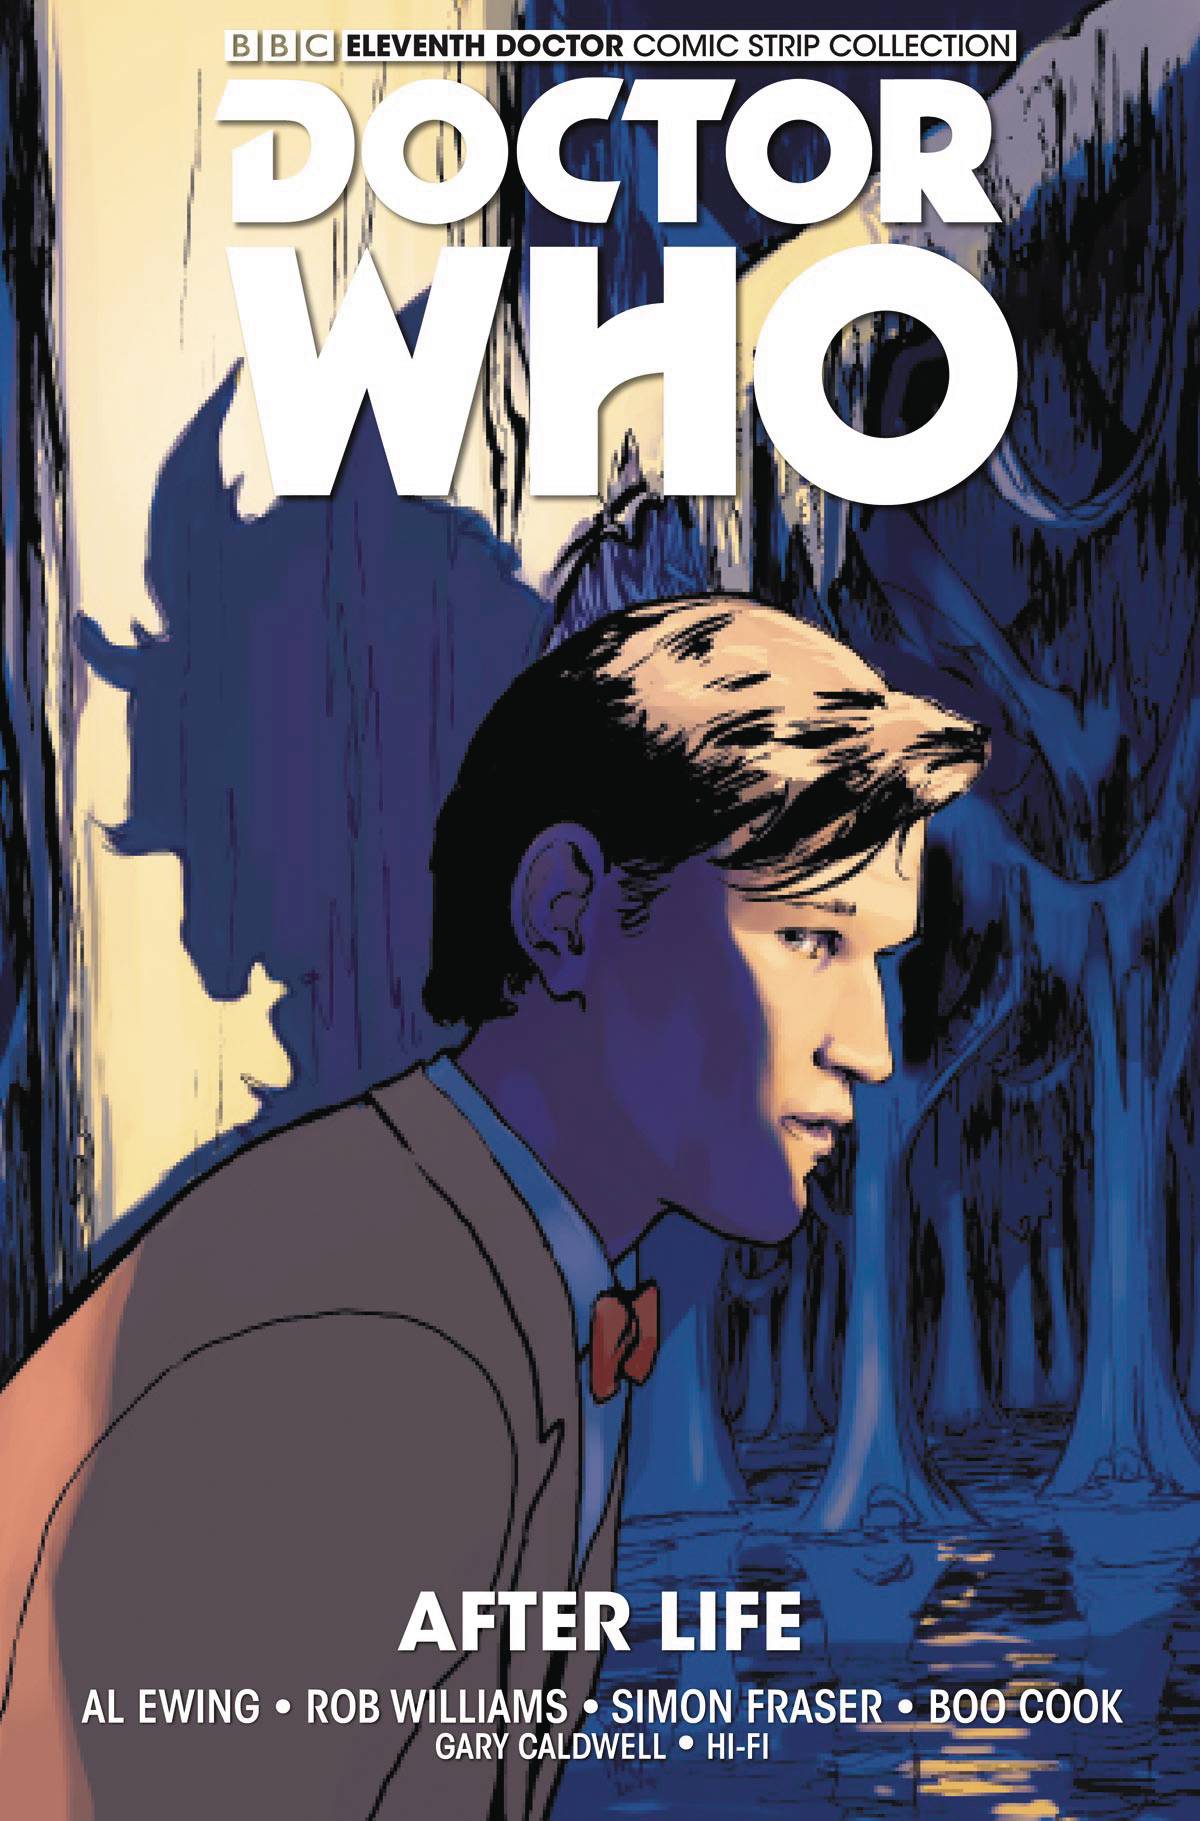 Doctor Who 11th Graphic Novel Limited Edition Volume 1 After Life